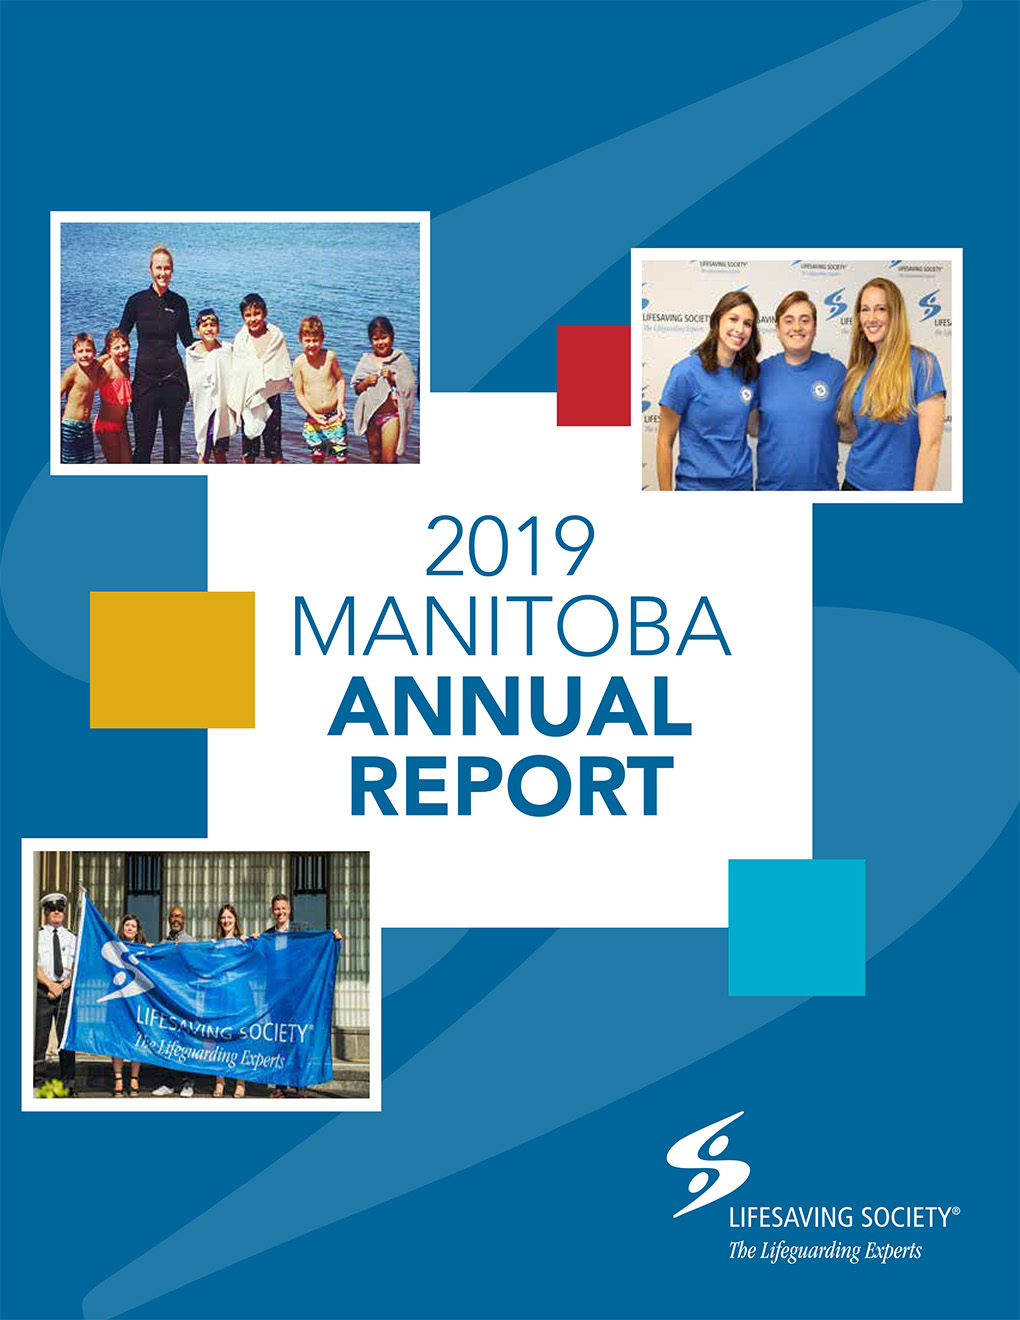 2019 Manitoba Annual Report cover - Assorted pictures of people in groups with colourful rectangles in background of design